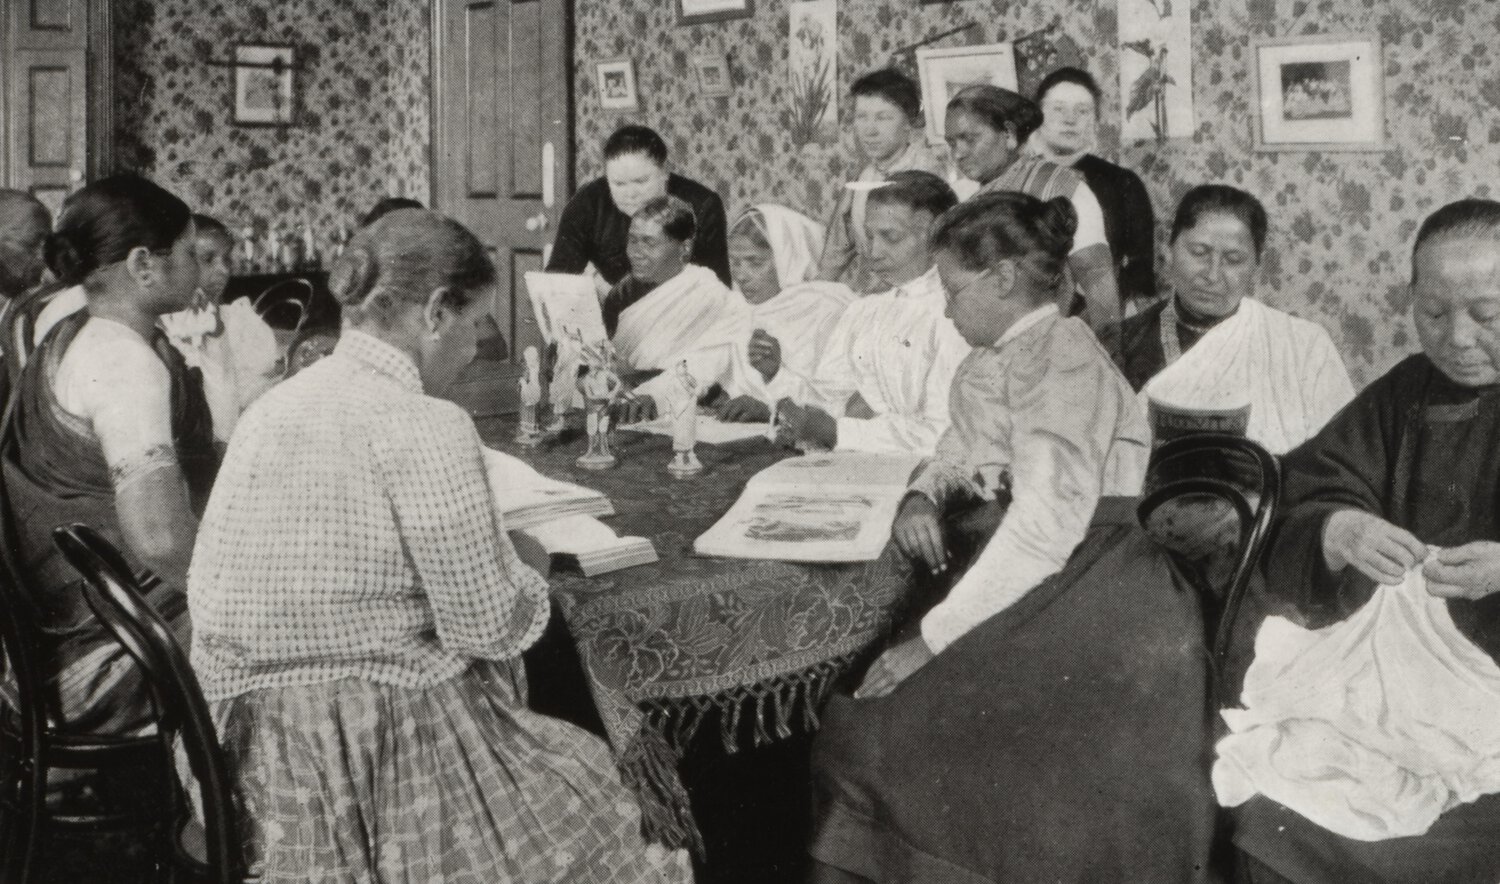 Interior scene with a large group of women seated around a table, many looking at documents.